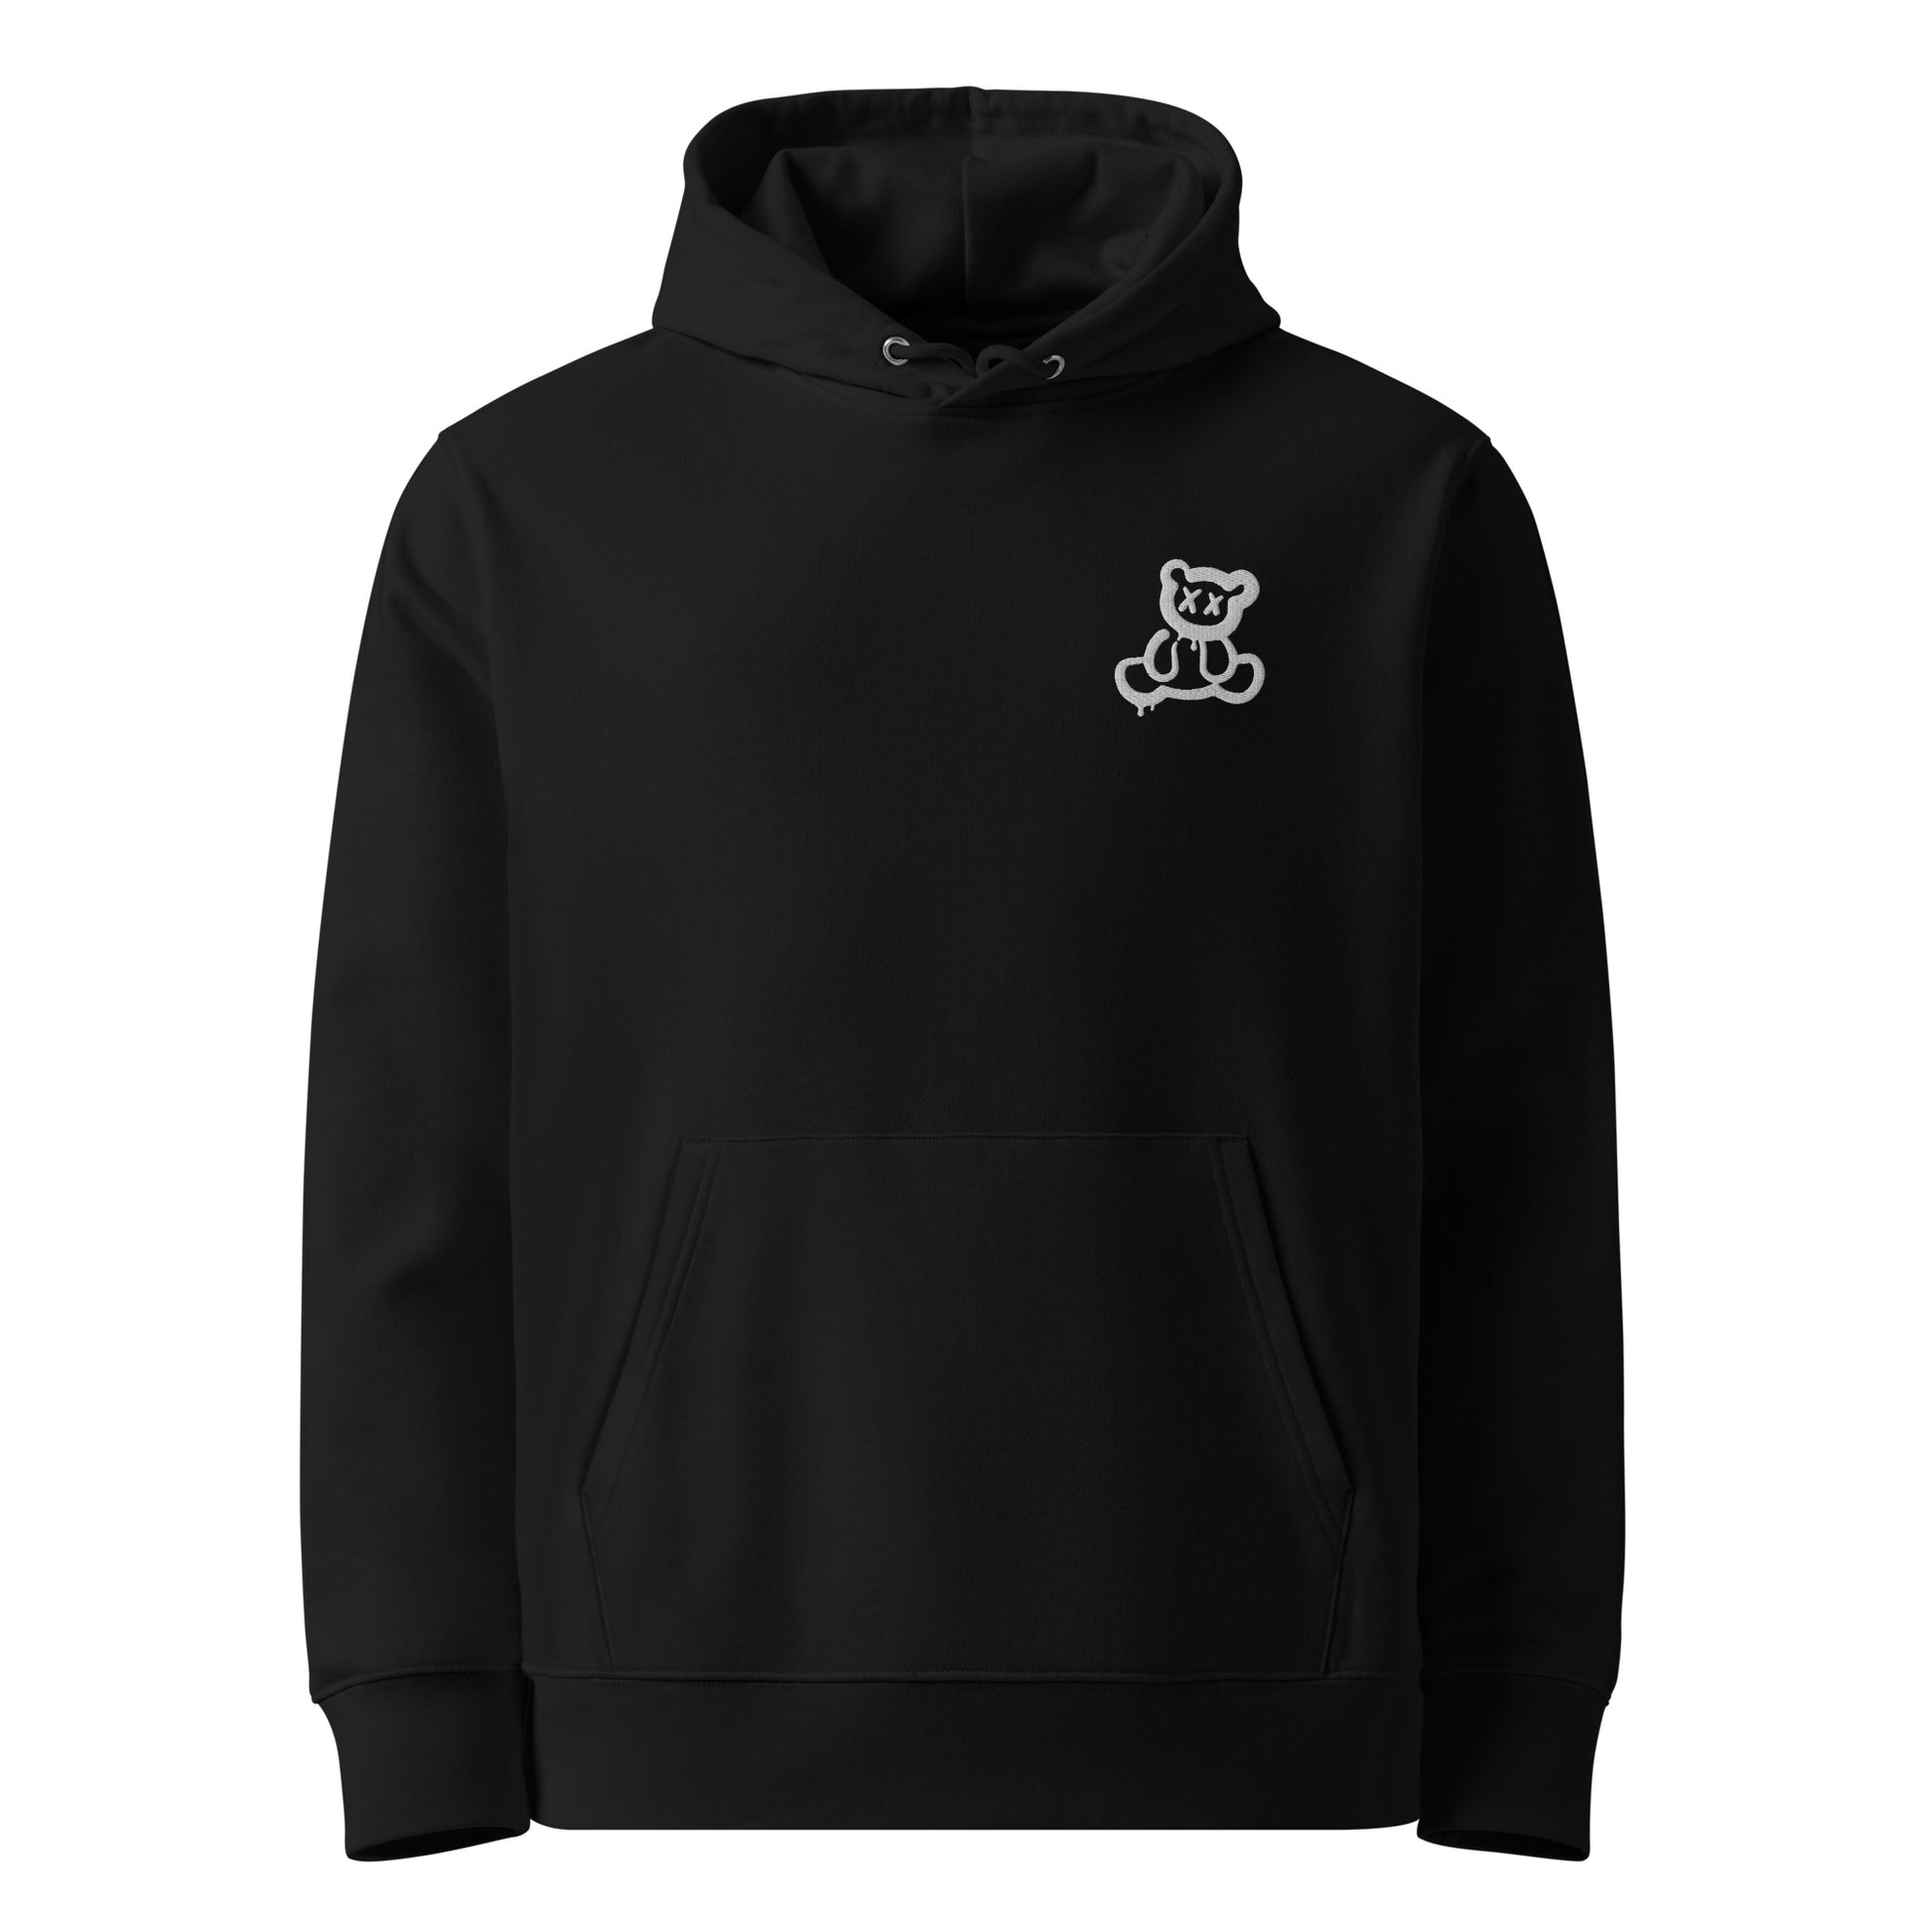 Unisex eco-friendly black hoodie featuring on the upper left chest; a subtle embroidered graffiti bear in white, adding a touch of lgbtq to your outfit. sizes: small, medium, large, extra large, double extra large.